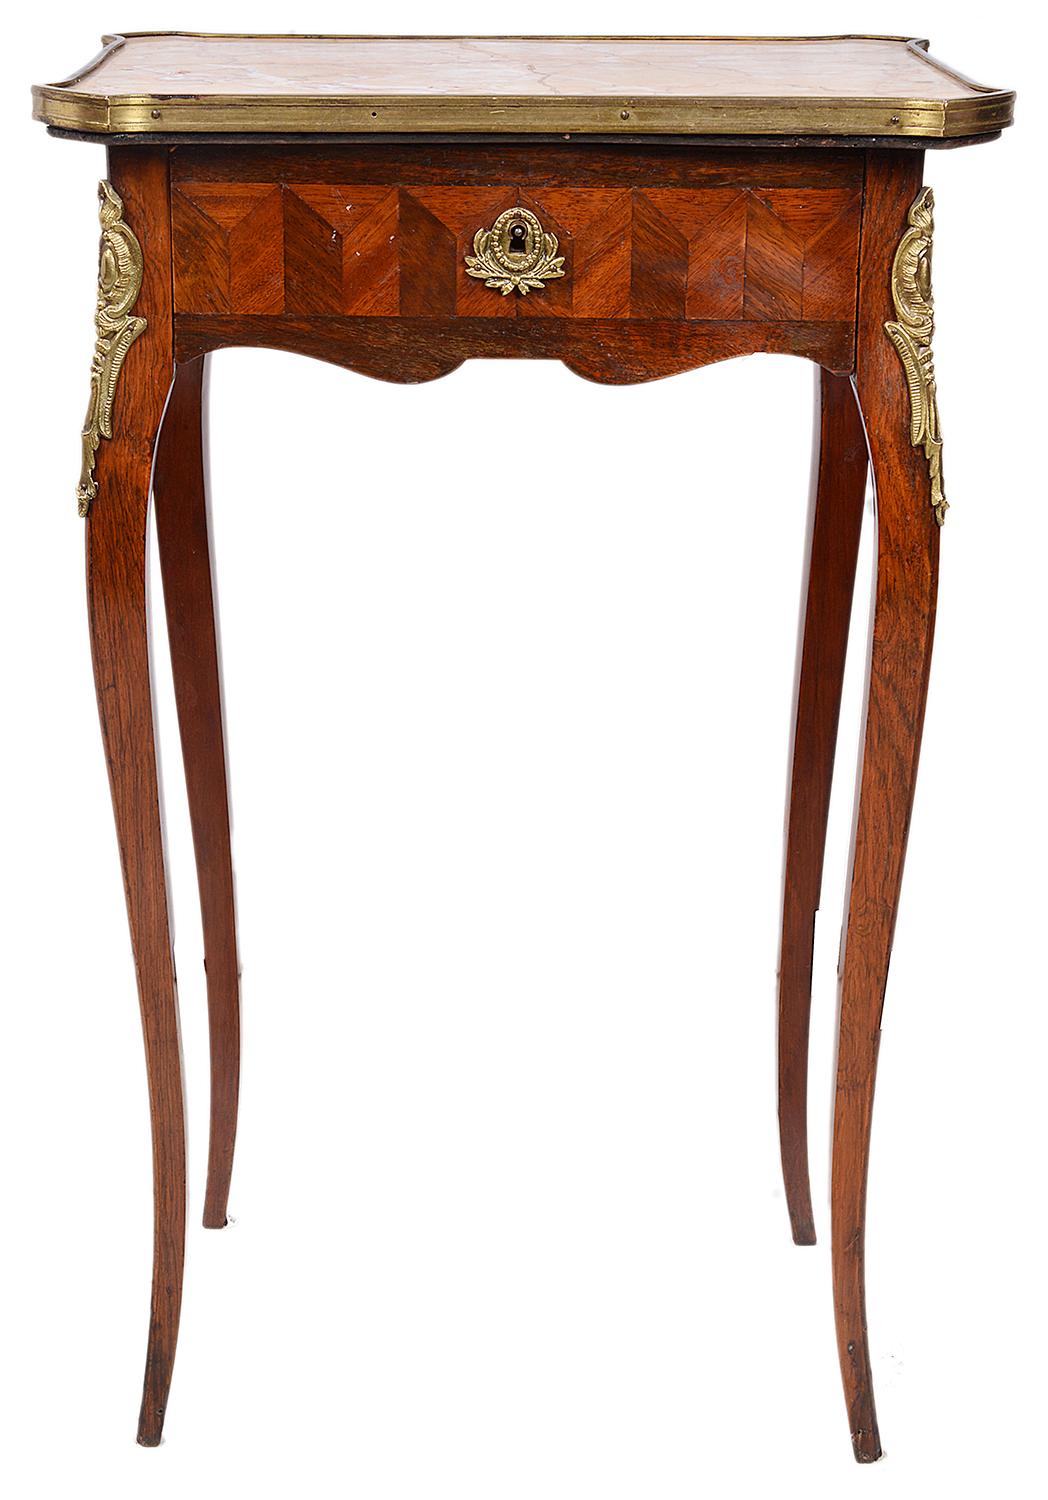 A good quality late 19th century Louis XVI style side table, having a Sienna marble top, a single frieze drawer, parquetry inlaid decoration to the frieze, raised on elegant cabriole legs.